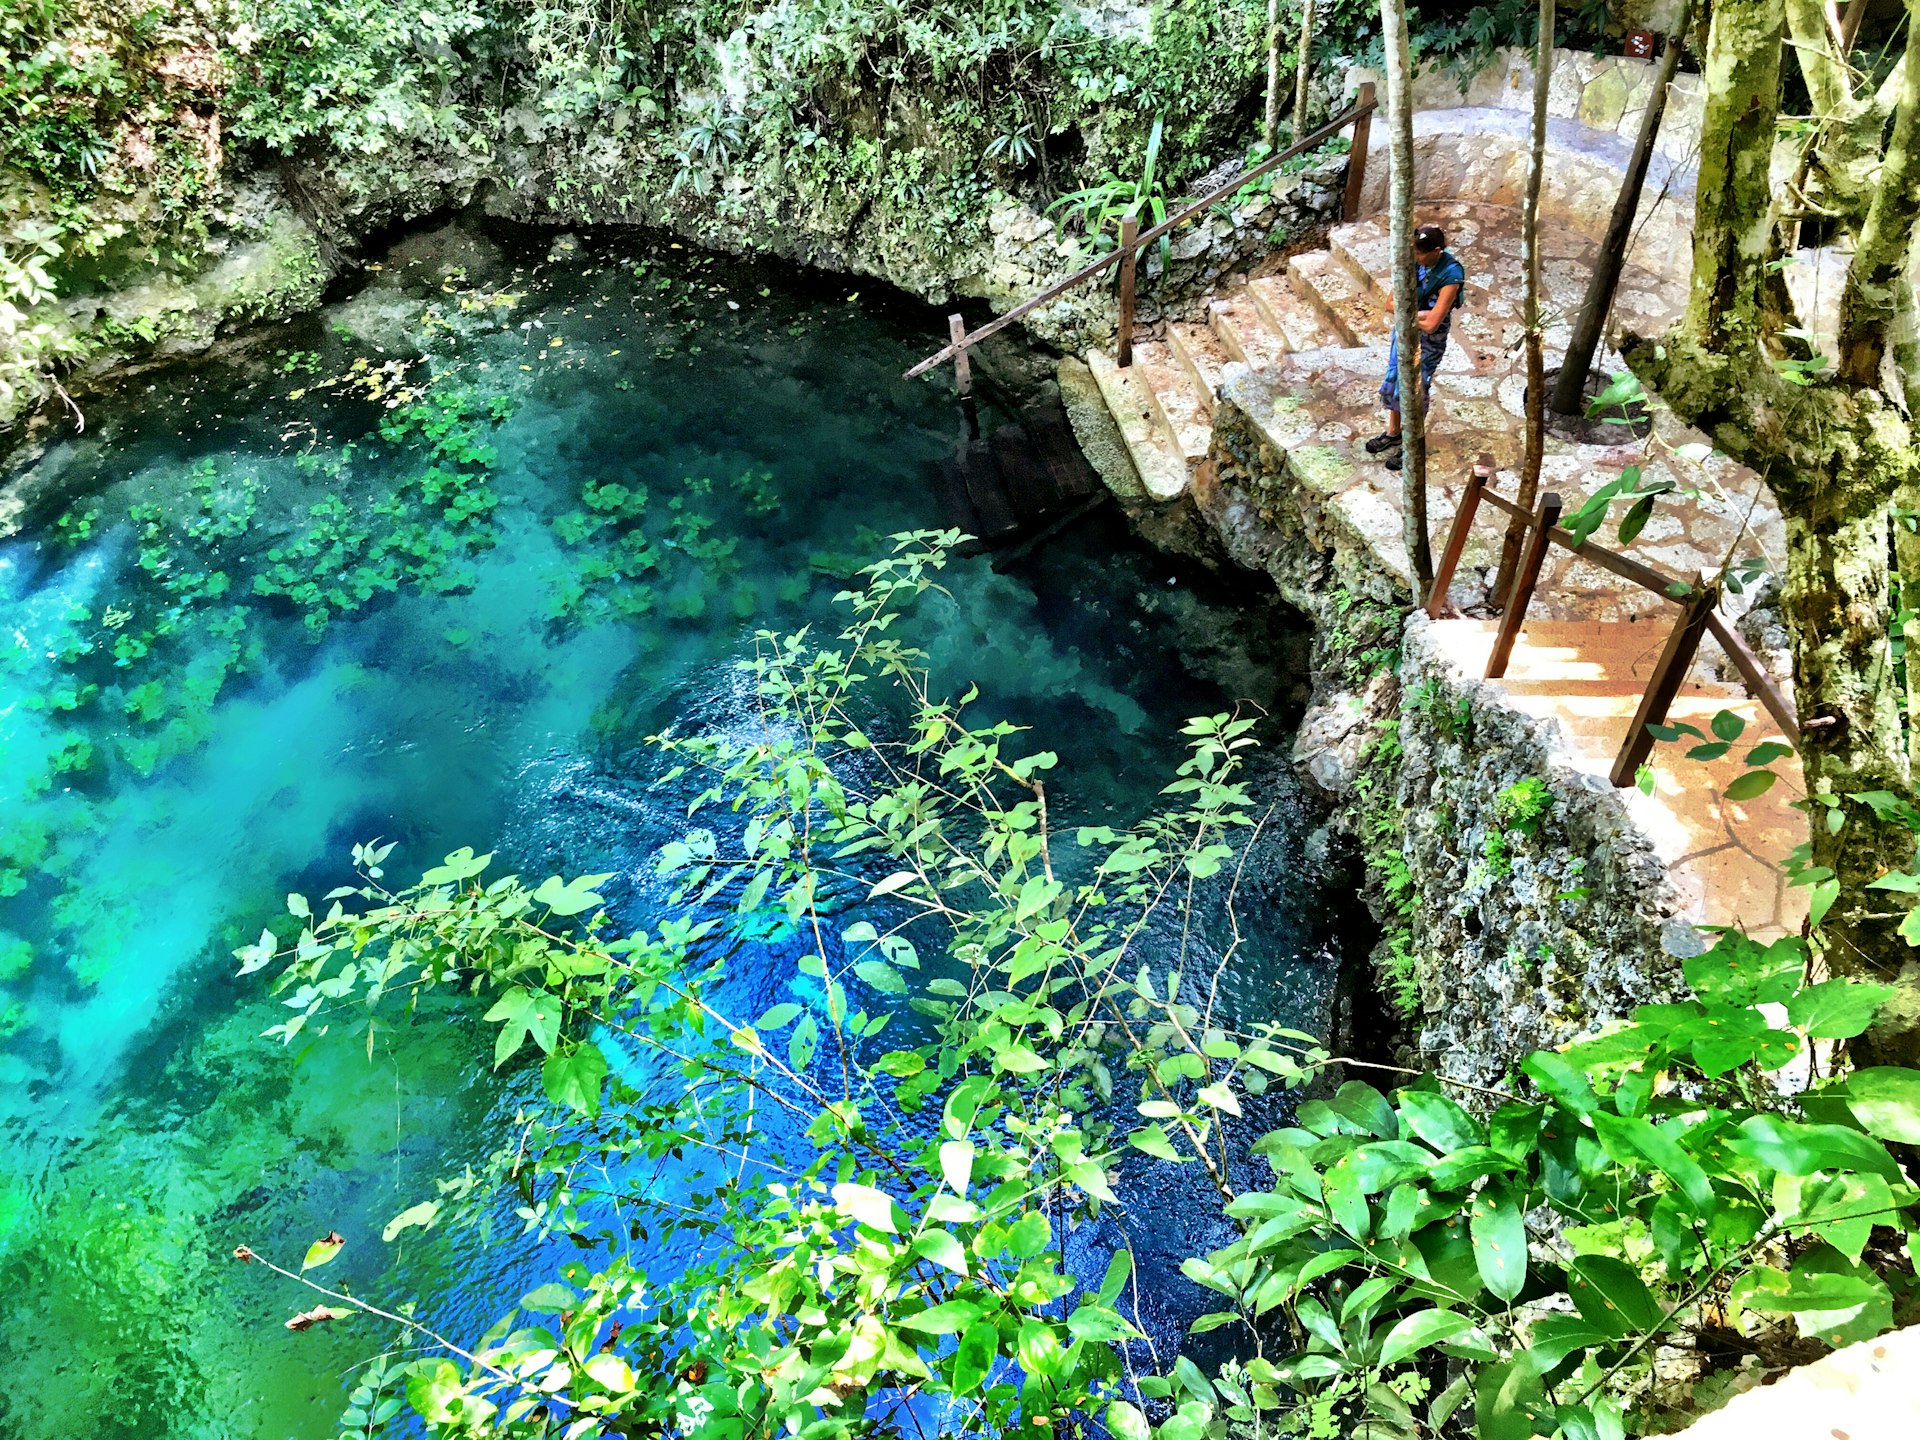 Man standing near turquoise blue Cenote Zapote, near Puerto Morelos in Quintana Roo, Mexico